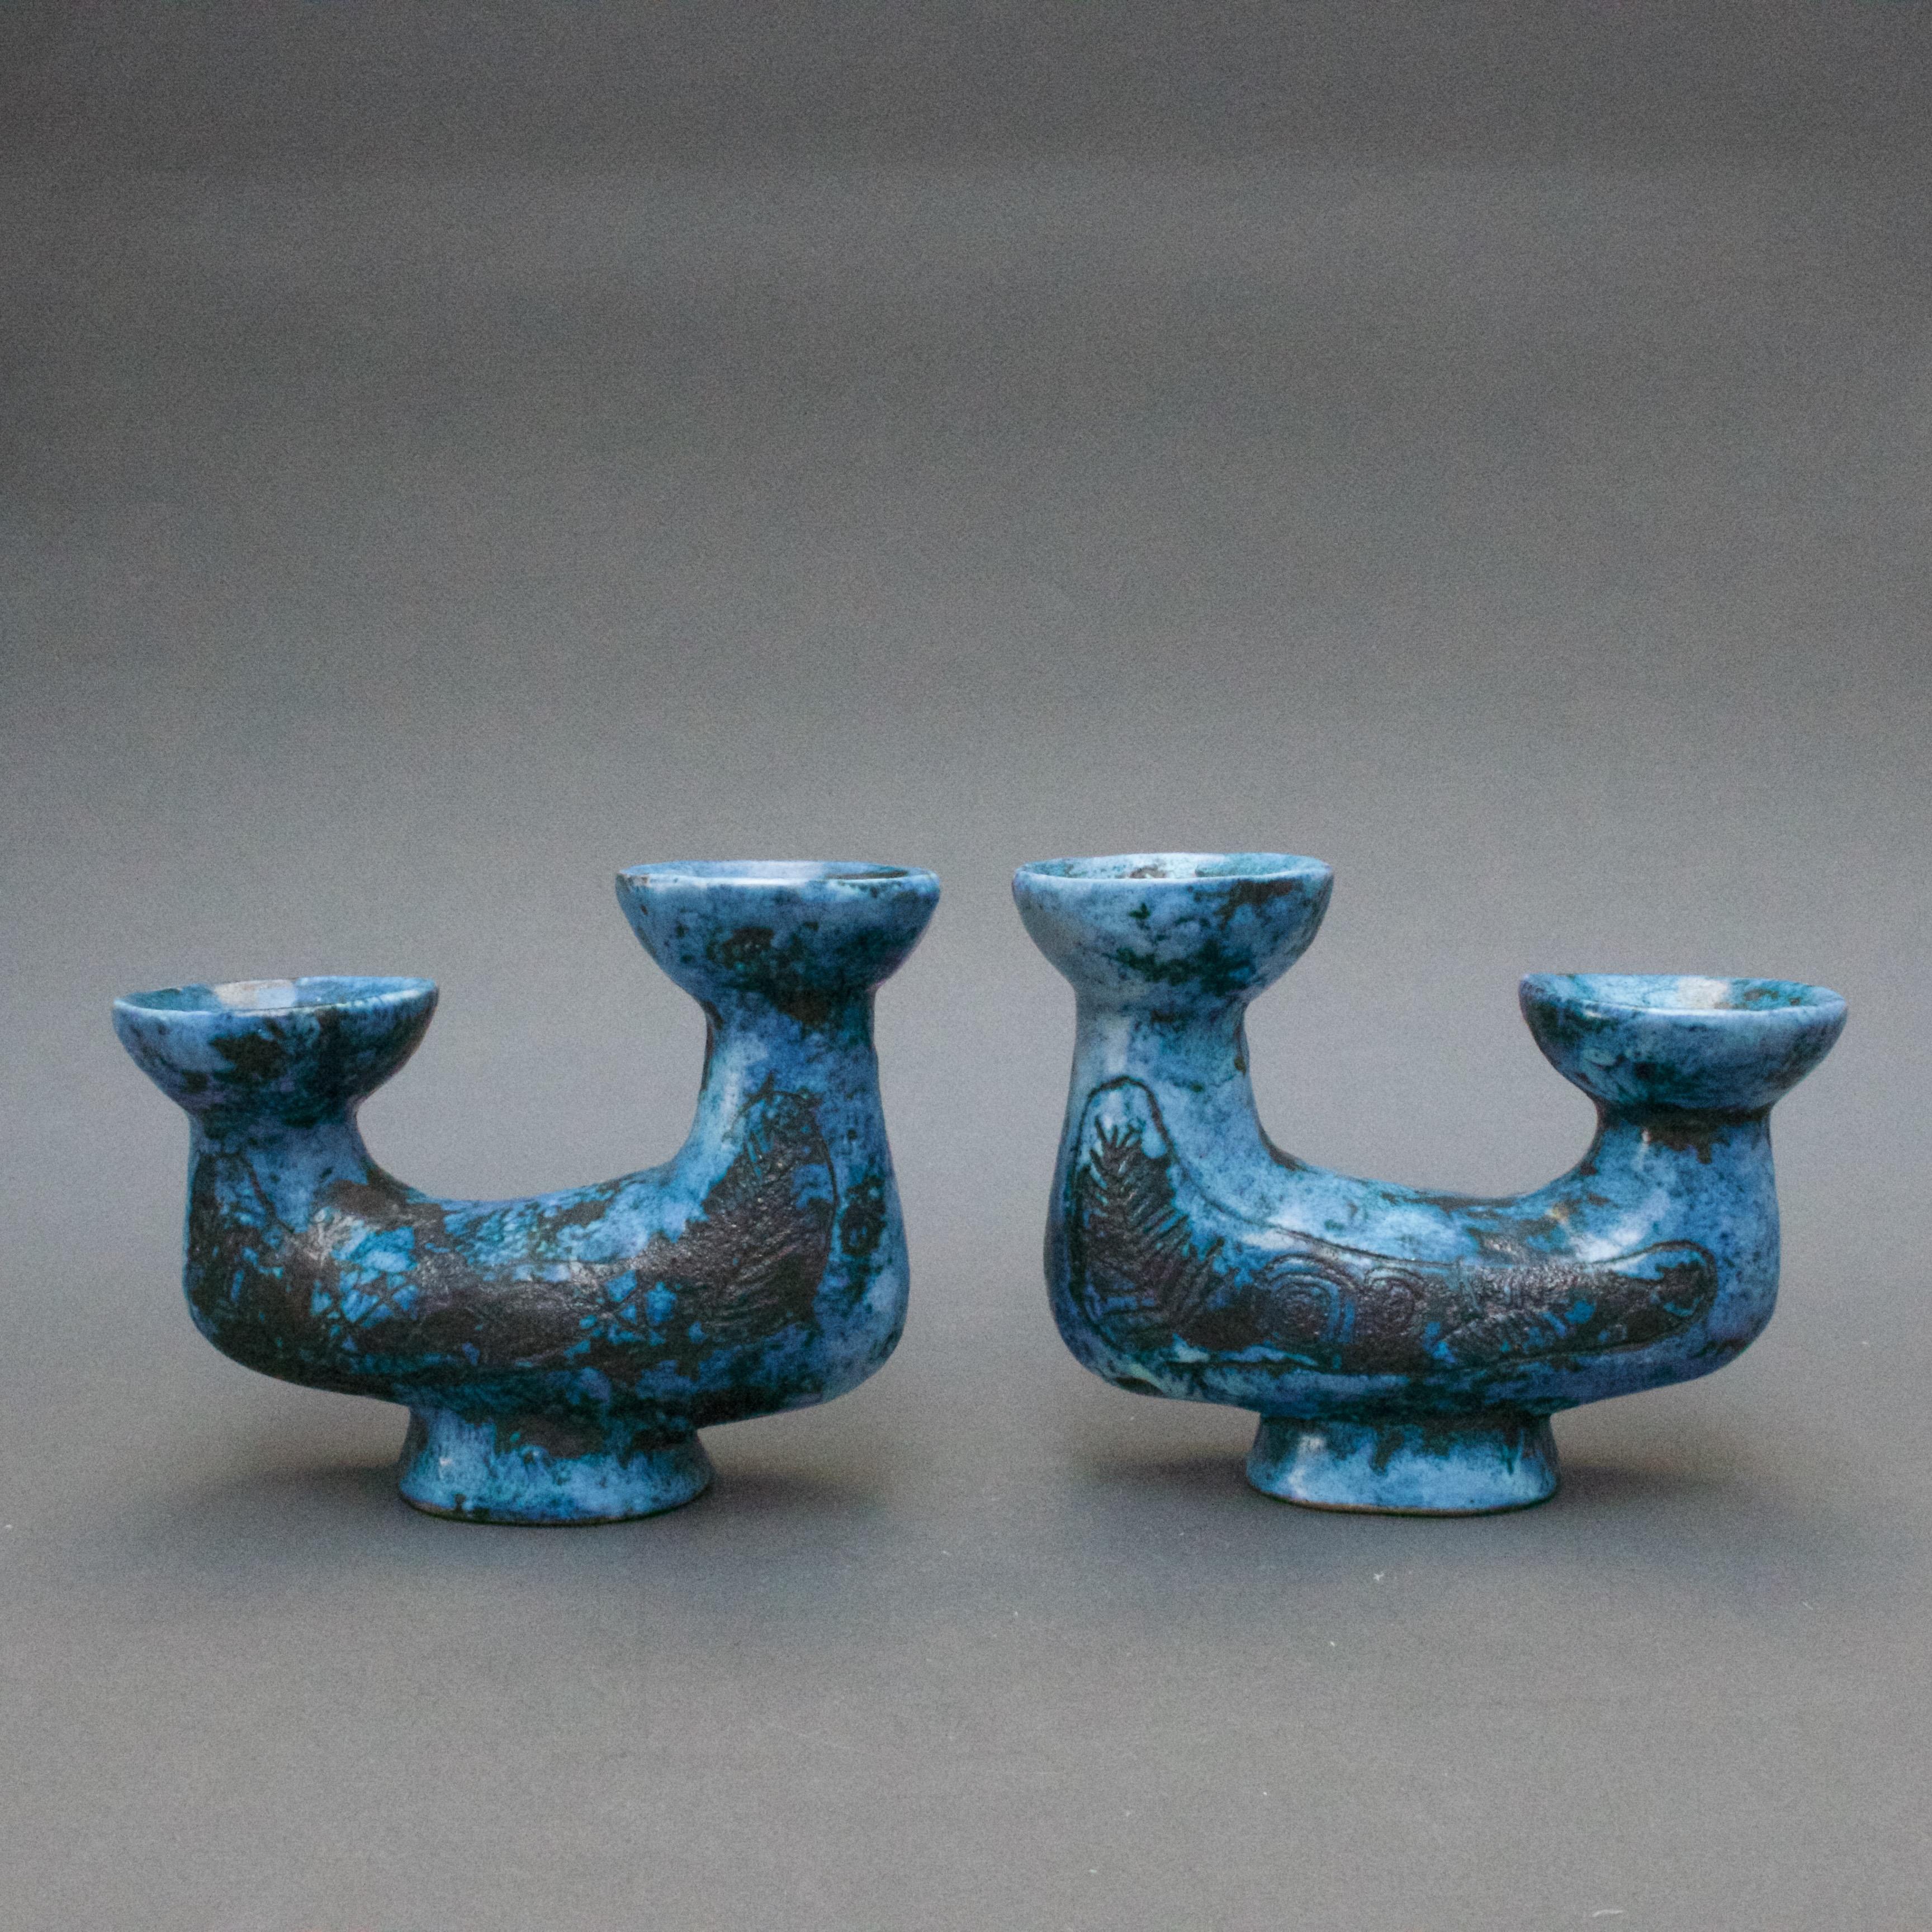 A pair of classic blue ceramic candle holders with motif by Jacques Blin (1920-1995), an engineer by trade but with a love for the visual arts. Blin has an immediately recognisable style characterised by a more or less misty appearance of the glaze